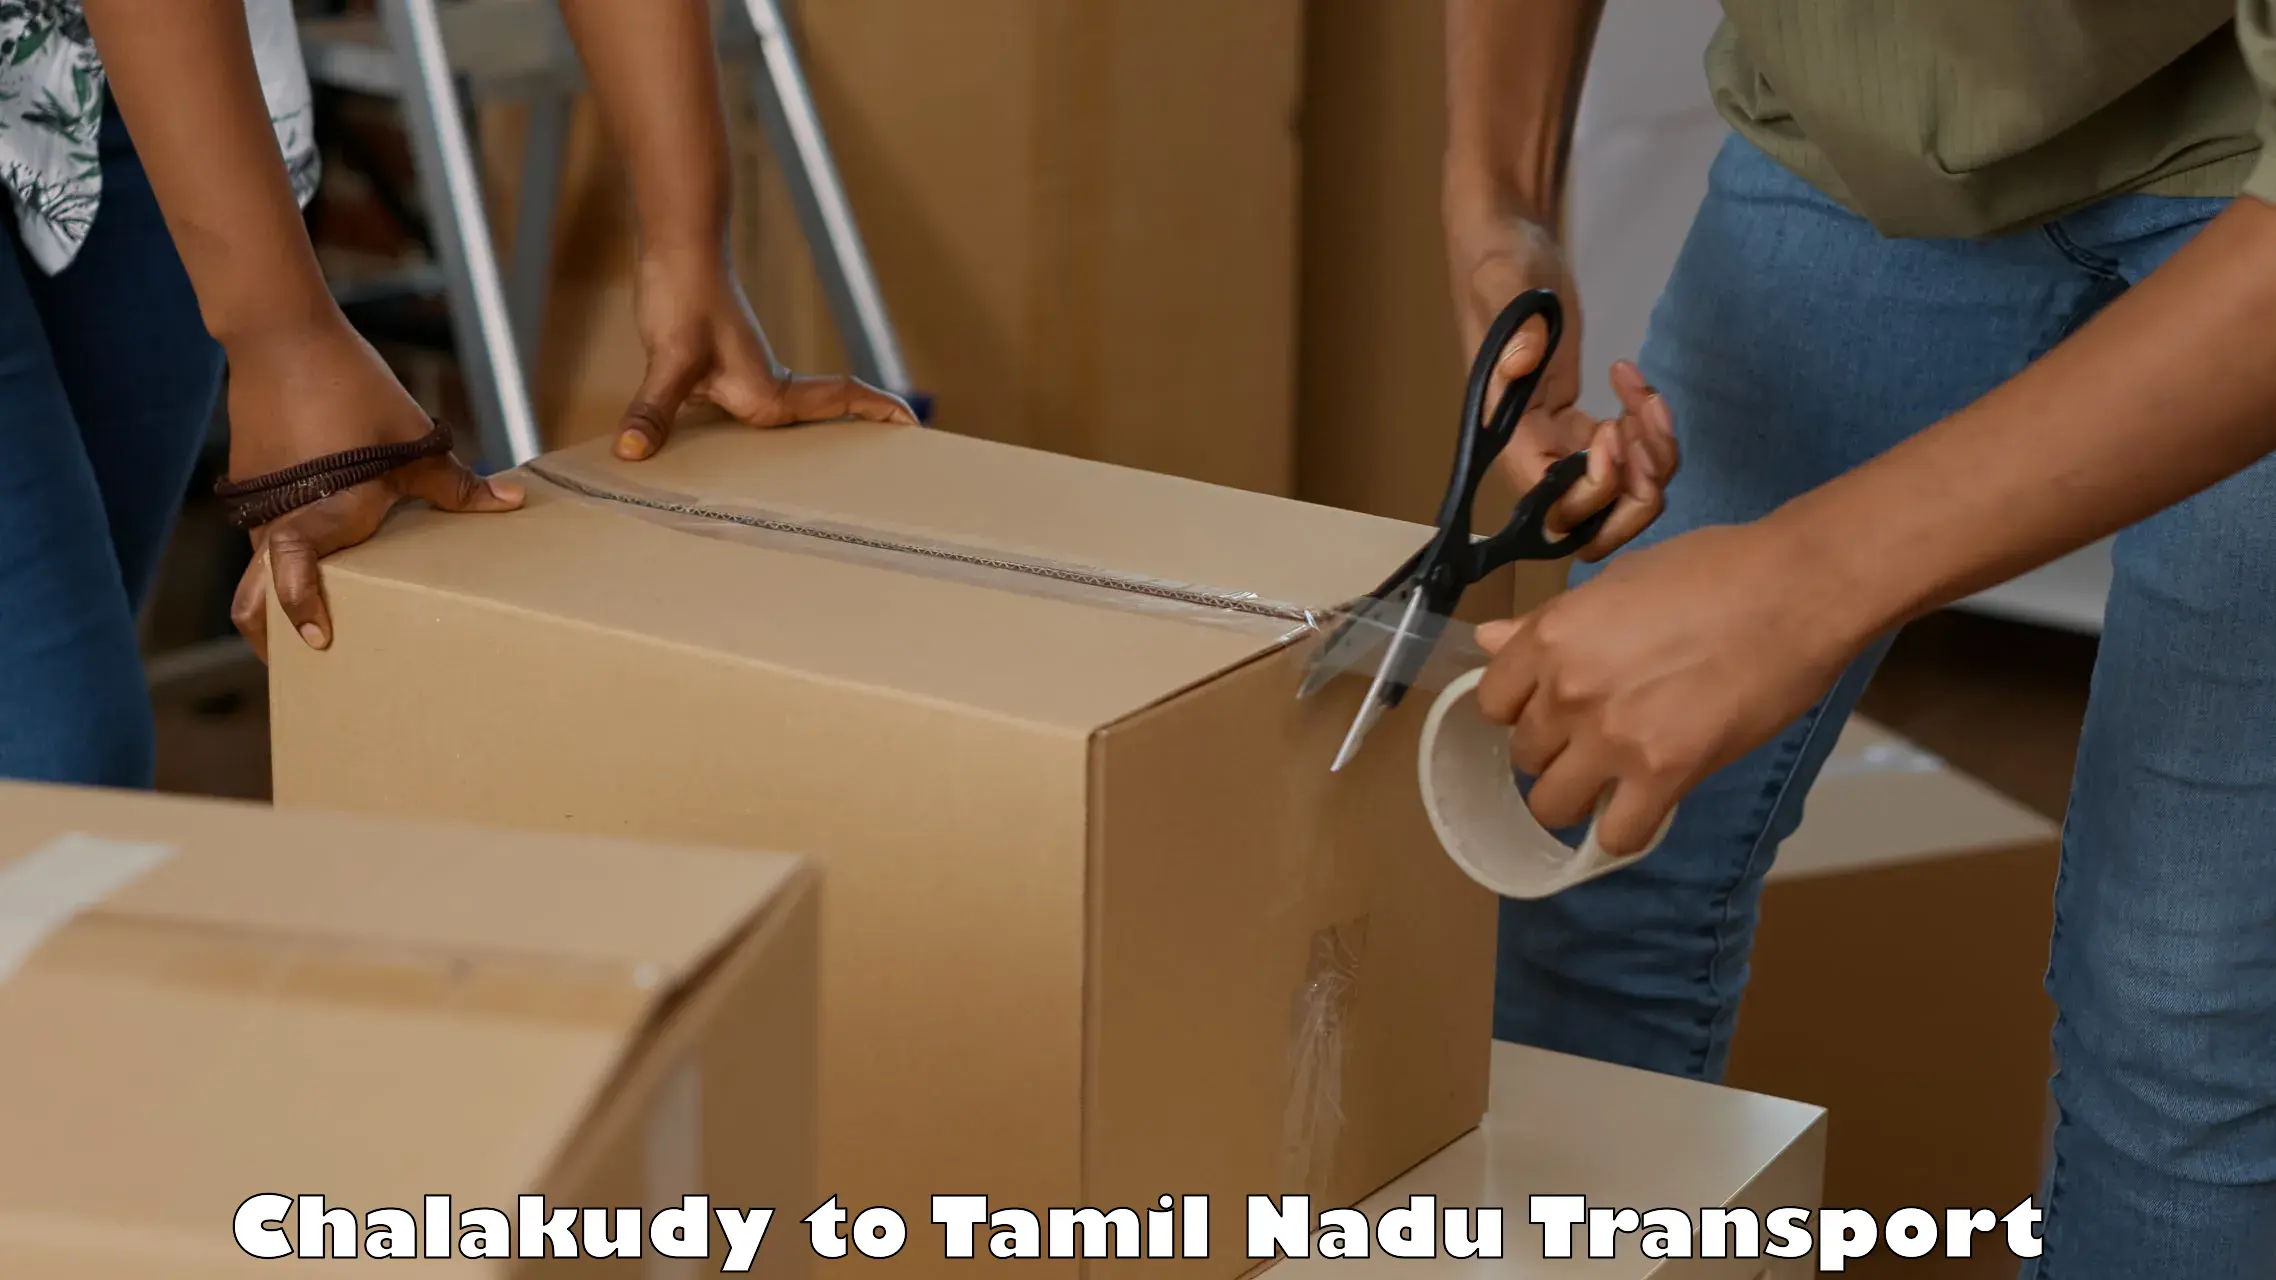 Furniture transport service Chalakudy to Trichy